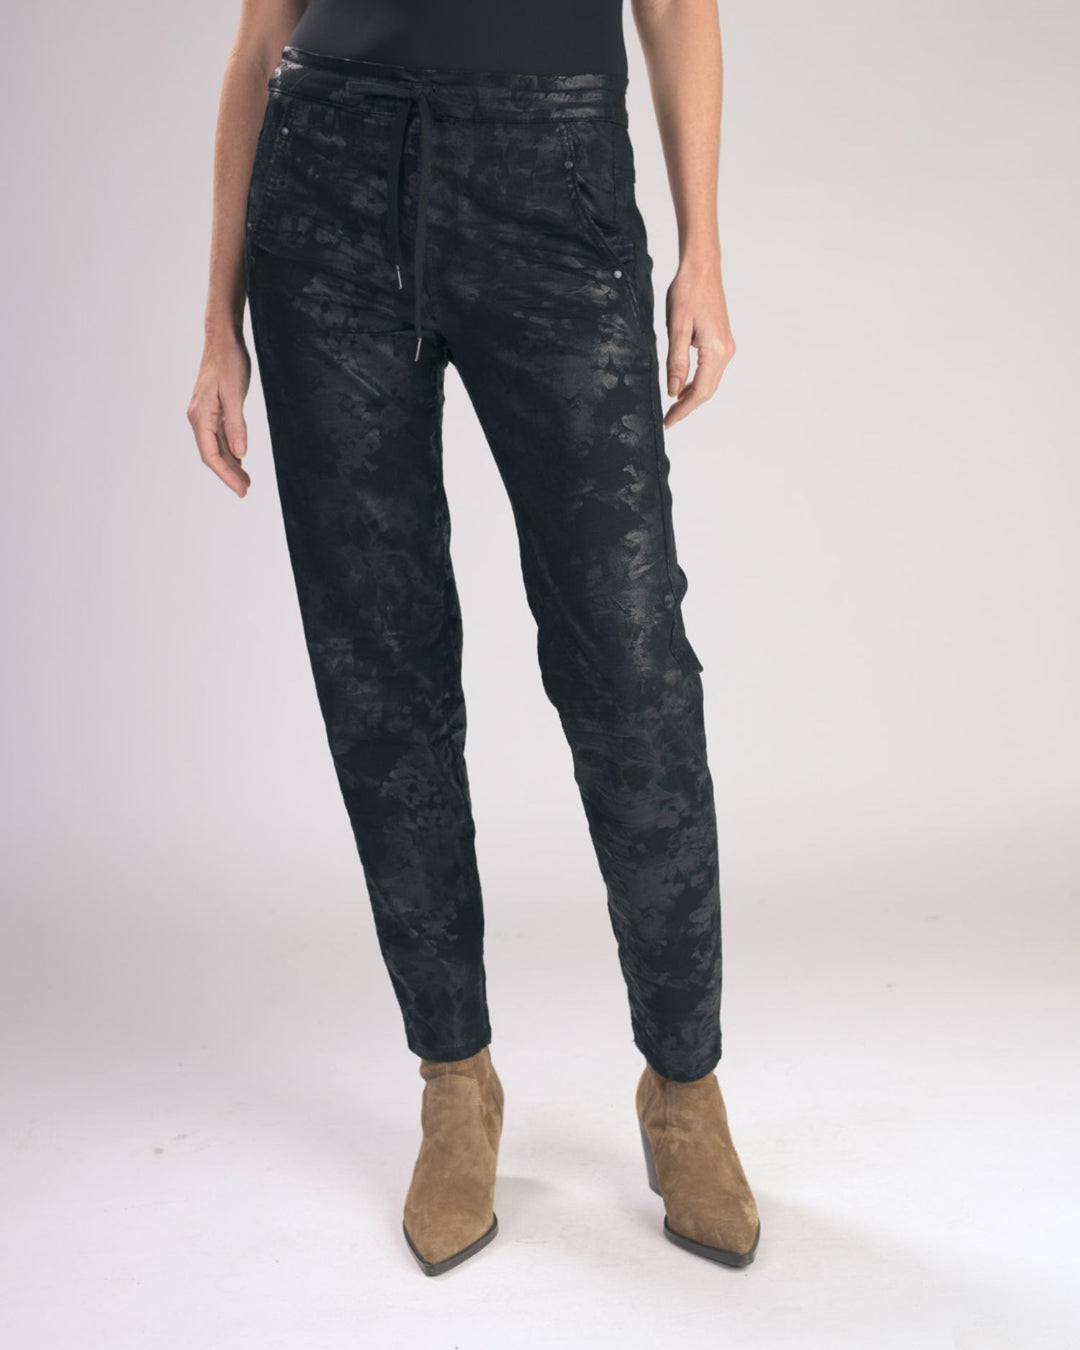 Floral Iconic Stretch Jeans, Black